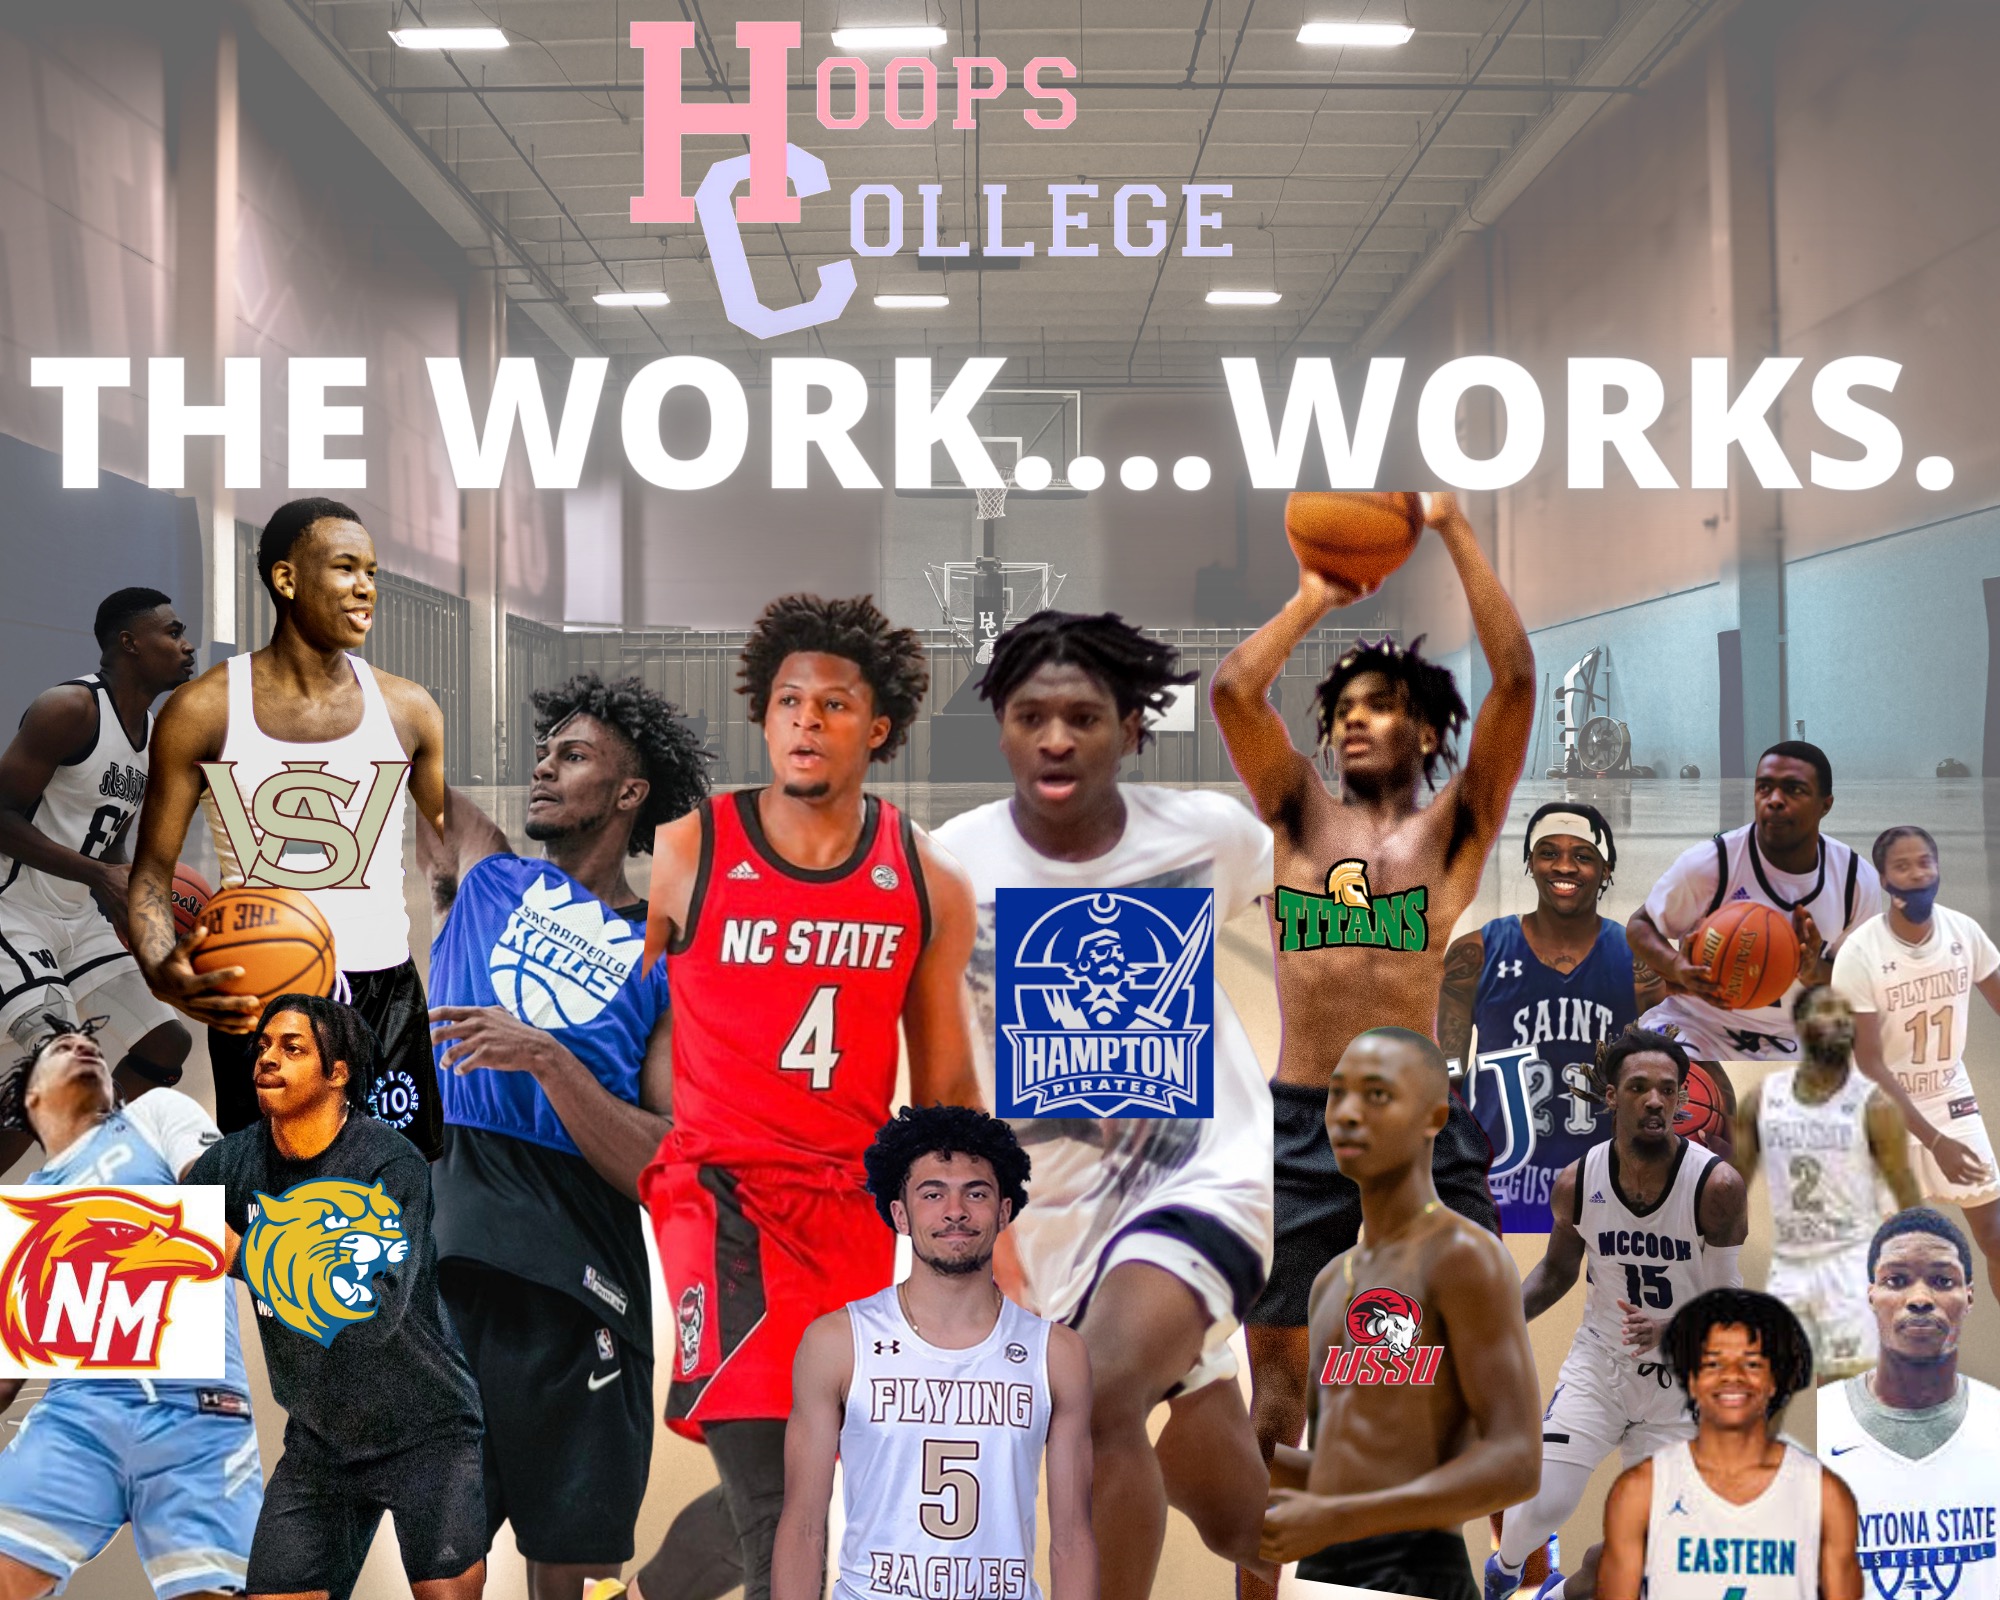 The work works. Hoops College Success Stories